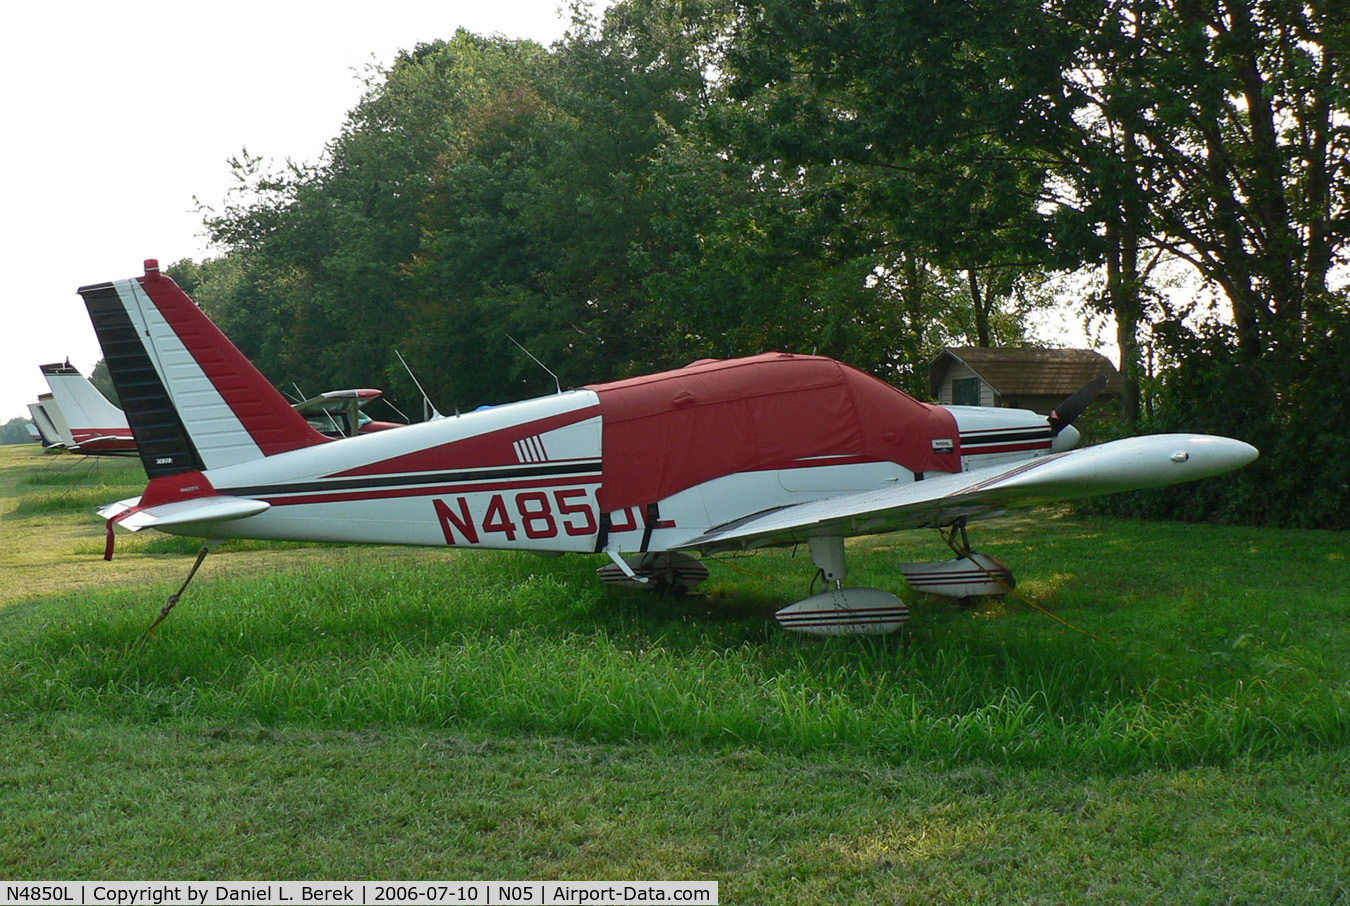 N4850L, 1967 Piper PA-28-180 C/N 28-4199, Oldtimer 1967 Cherokee Archer at home at Hackettstown.